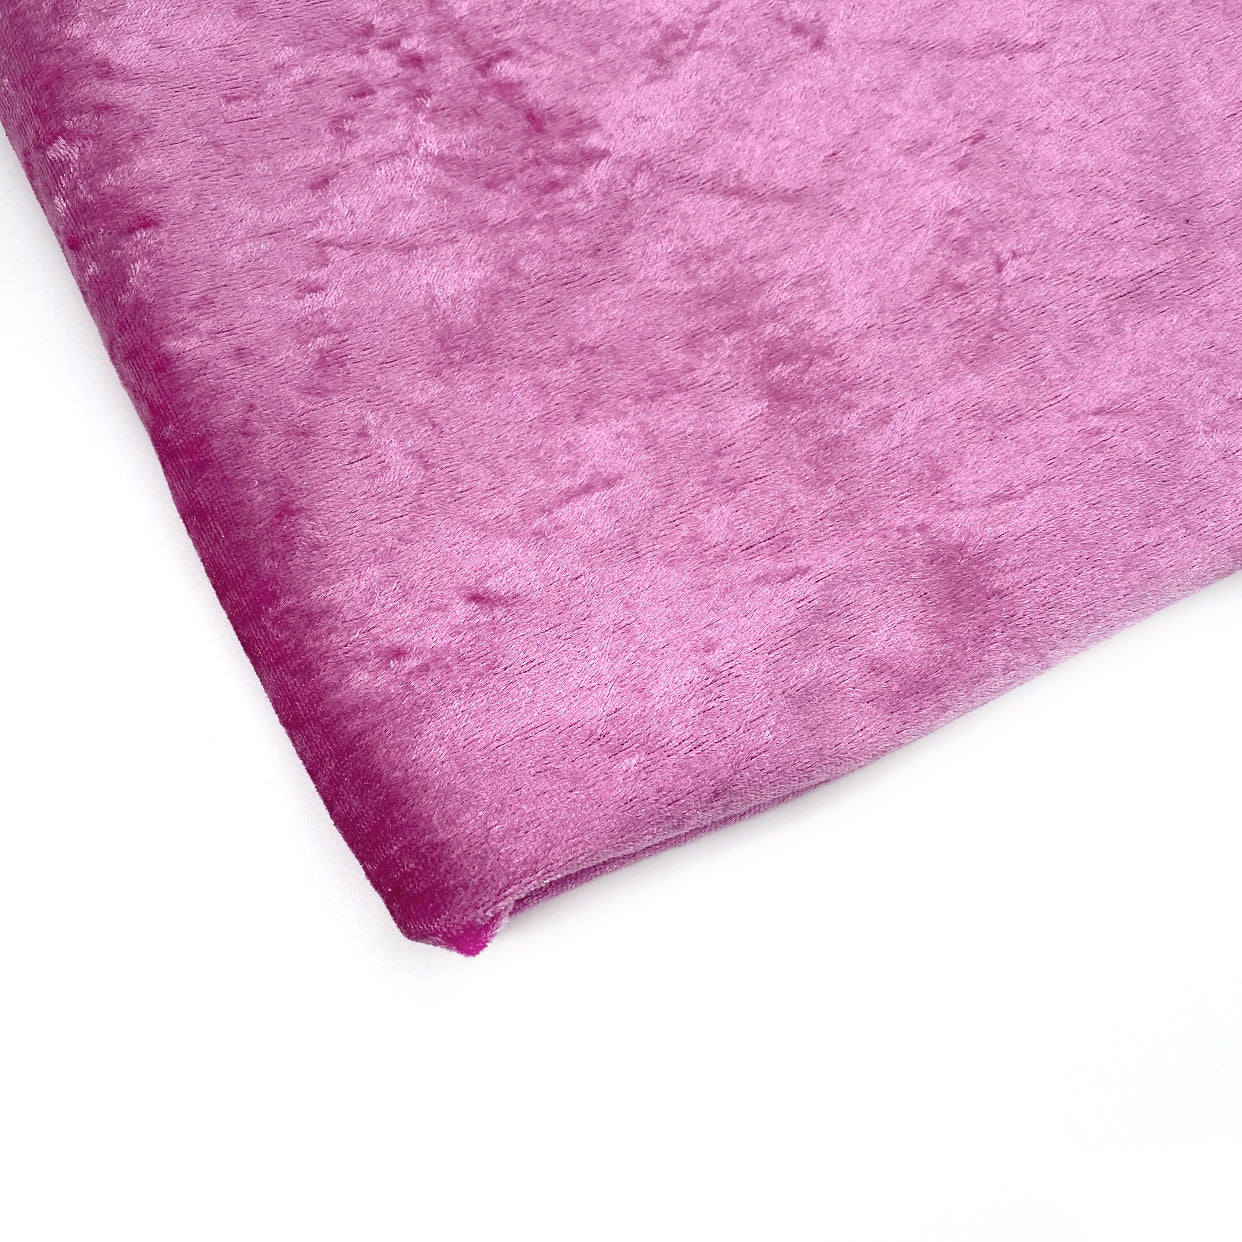 Party Pink Crushed Velvet Fabric